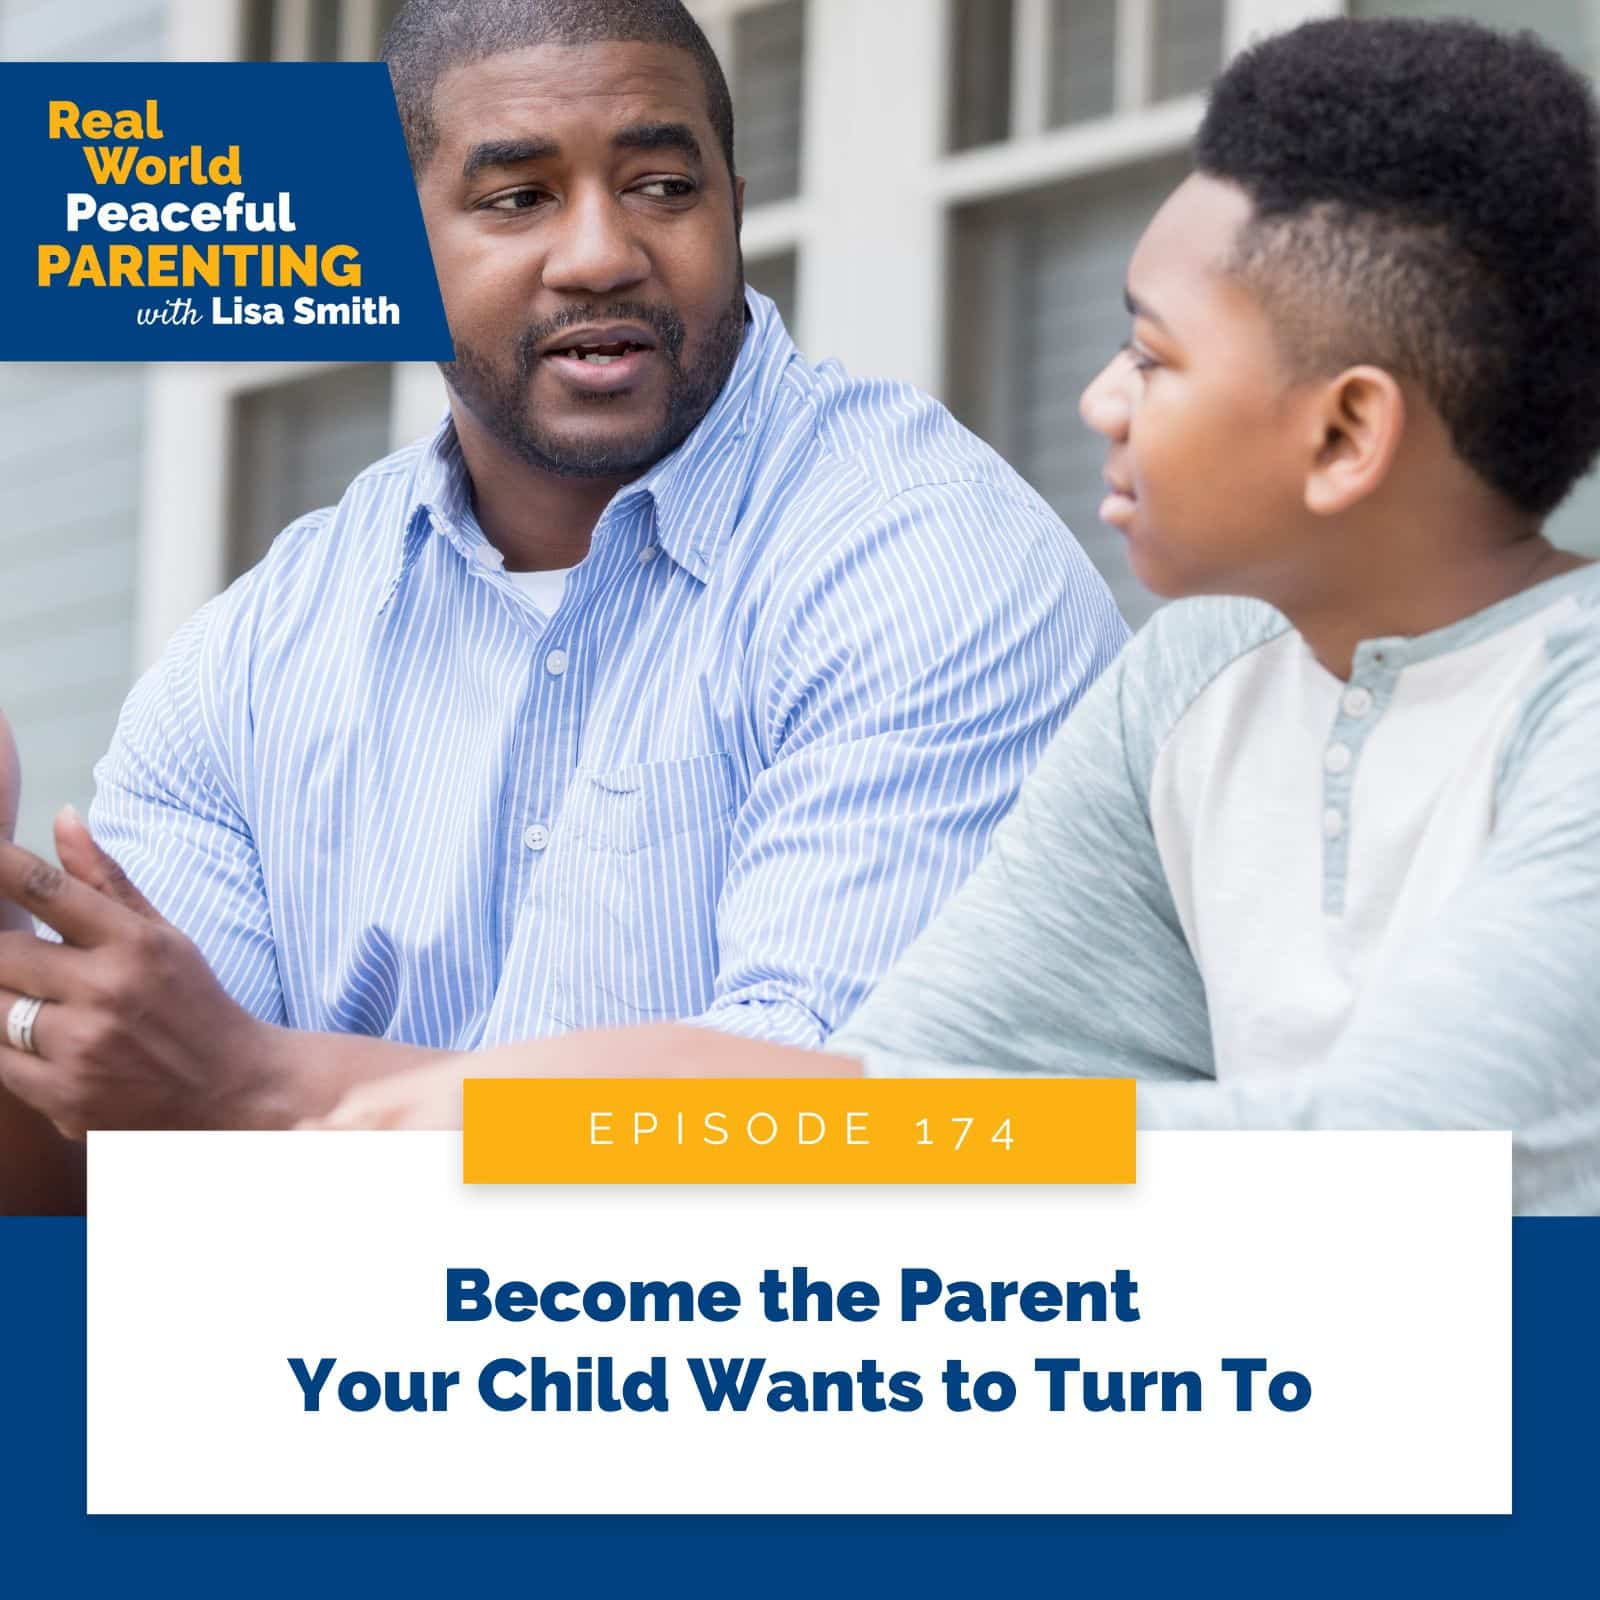 Real World Peaceful Parenting with Lisa Smith | Become the Parent Your Child Wants to Turn To